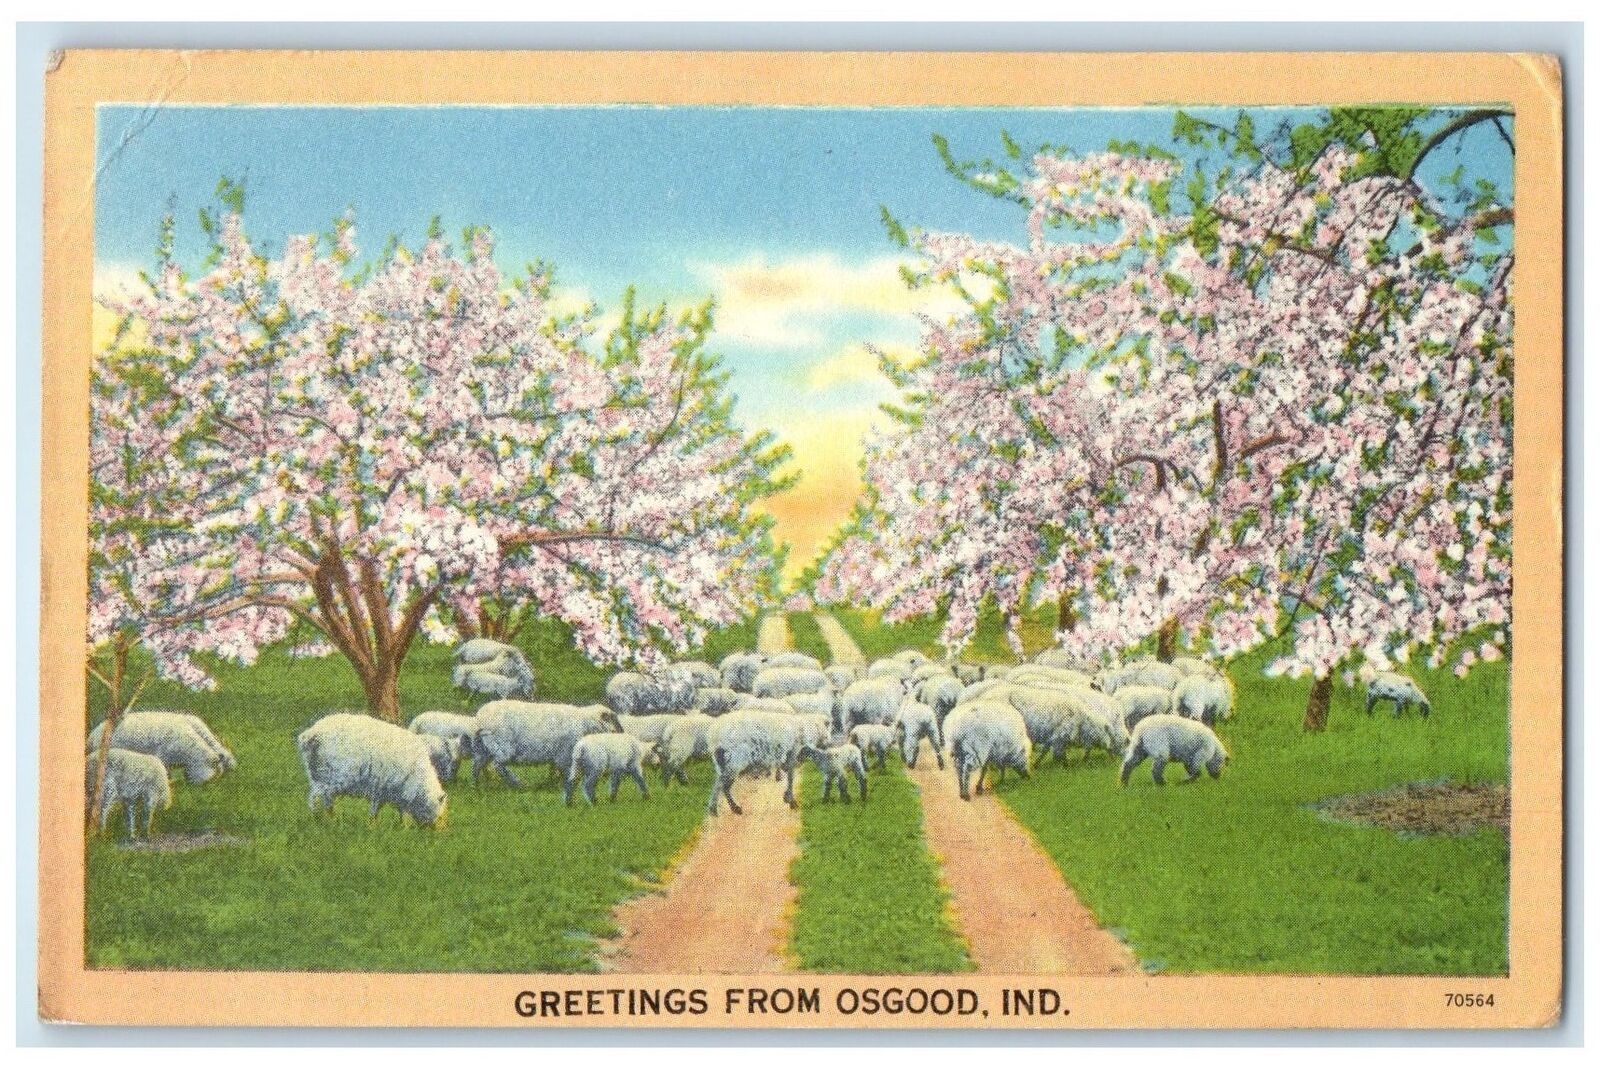 1954 Greetings From Osgood Lambs Cherry Blossoms View Indiana IN Posted Postcard